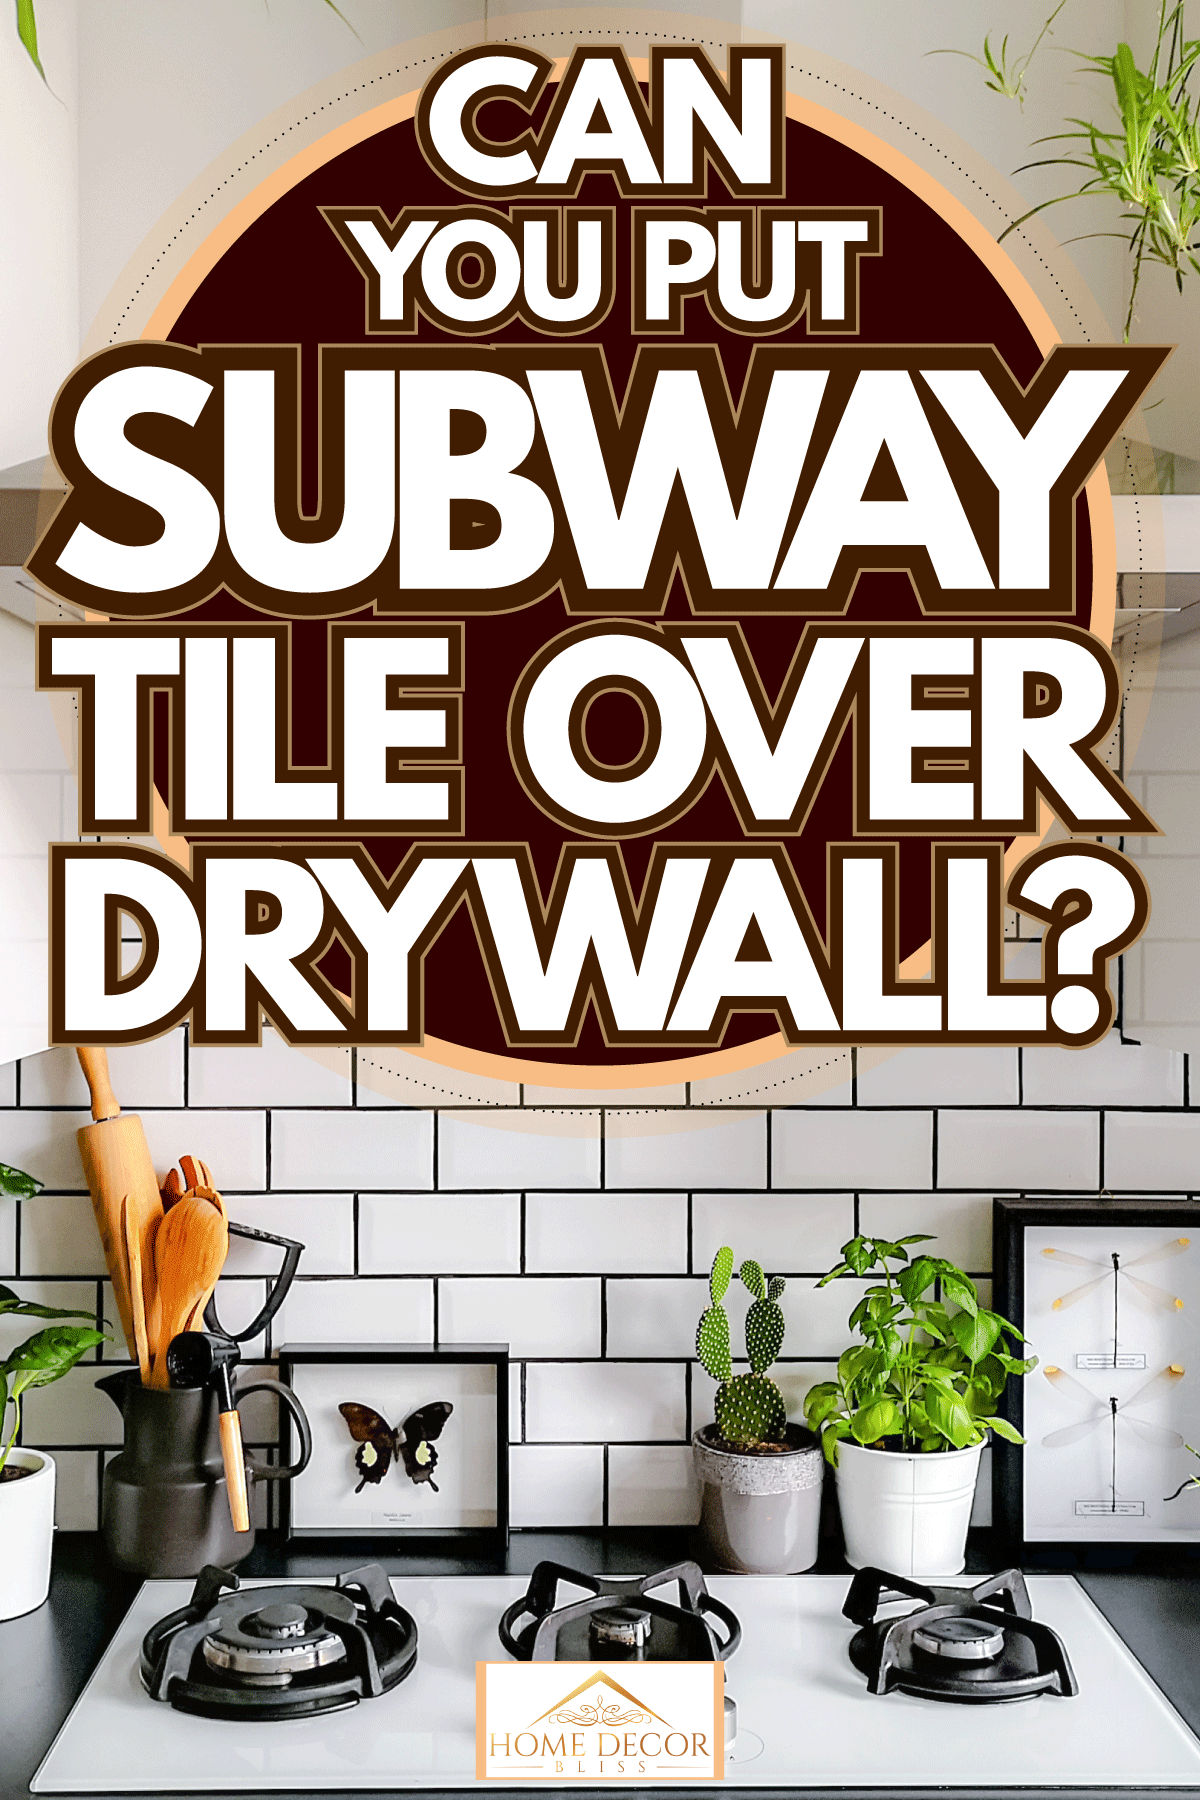 White brick subway tile used for a backsplash in the kitchen with small basil leaves, Can You Put Subway Tile Over Drywall?